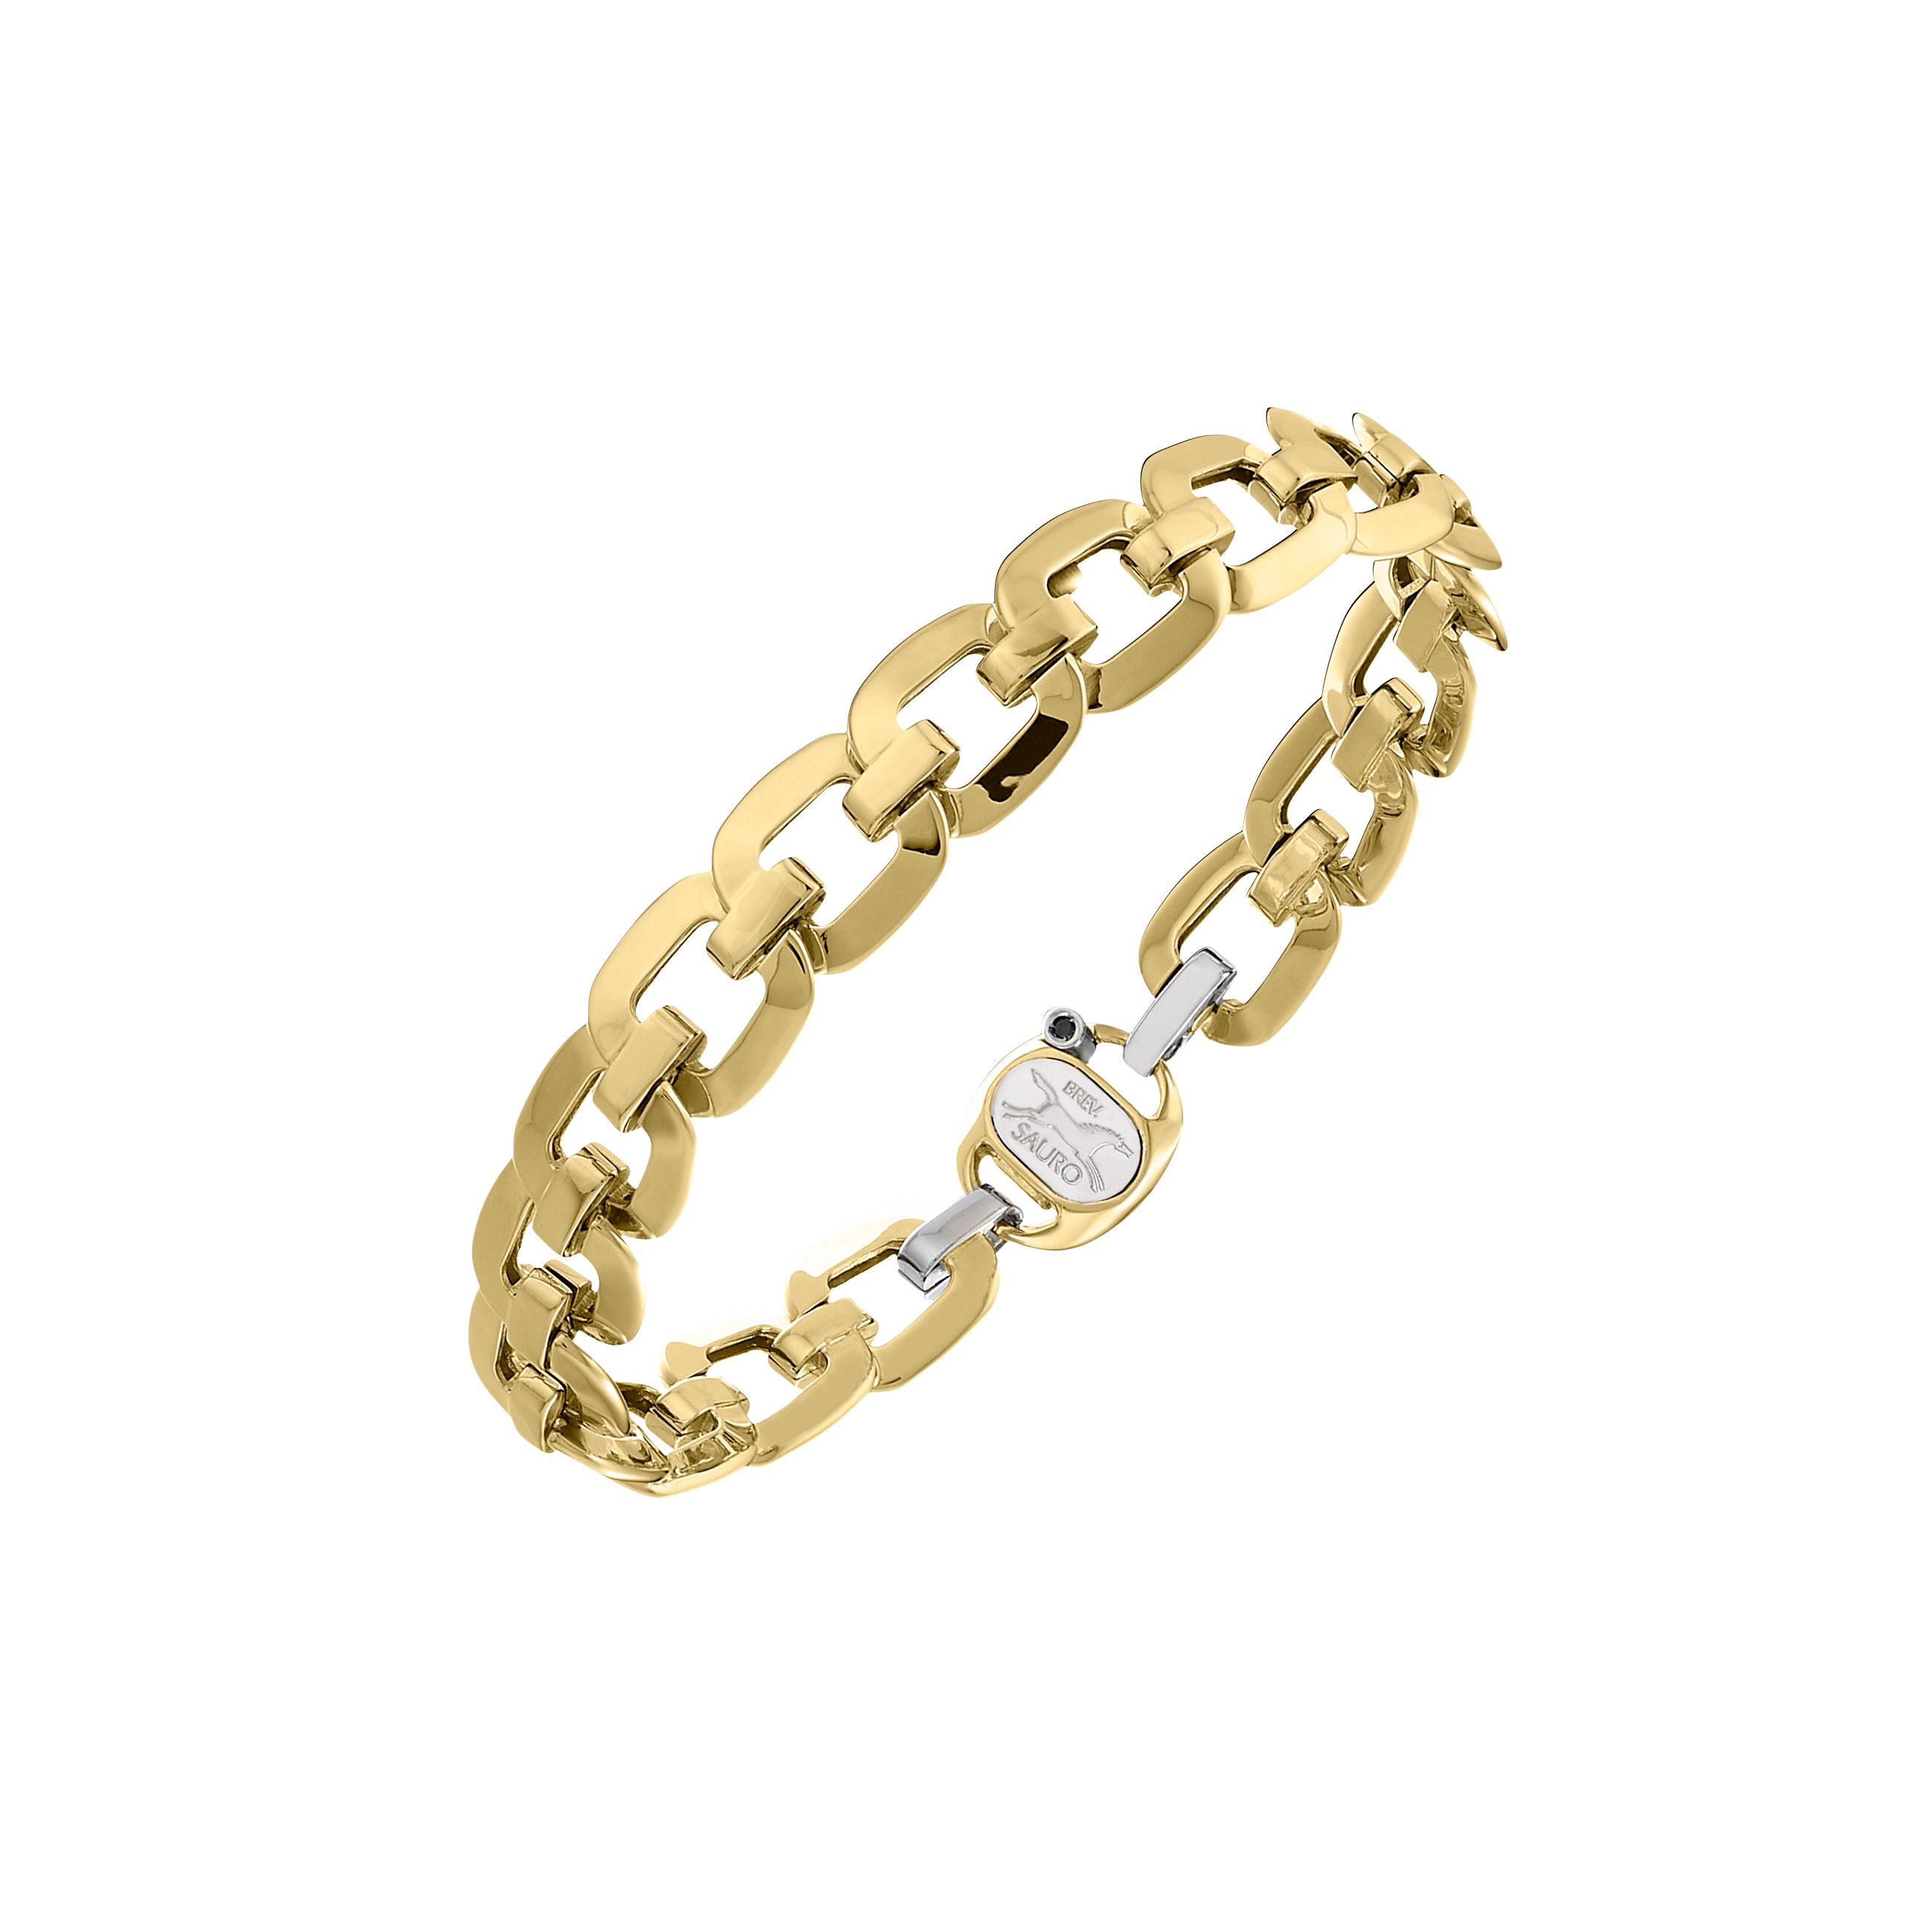 7 Popular And Stylish Gold Bracelet Designs For You